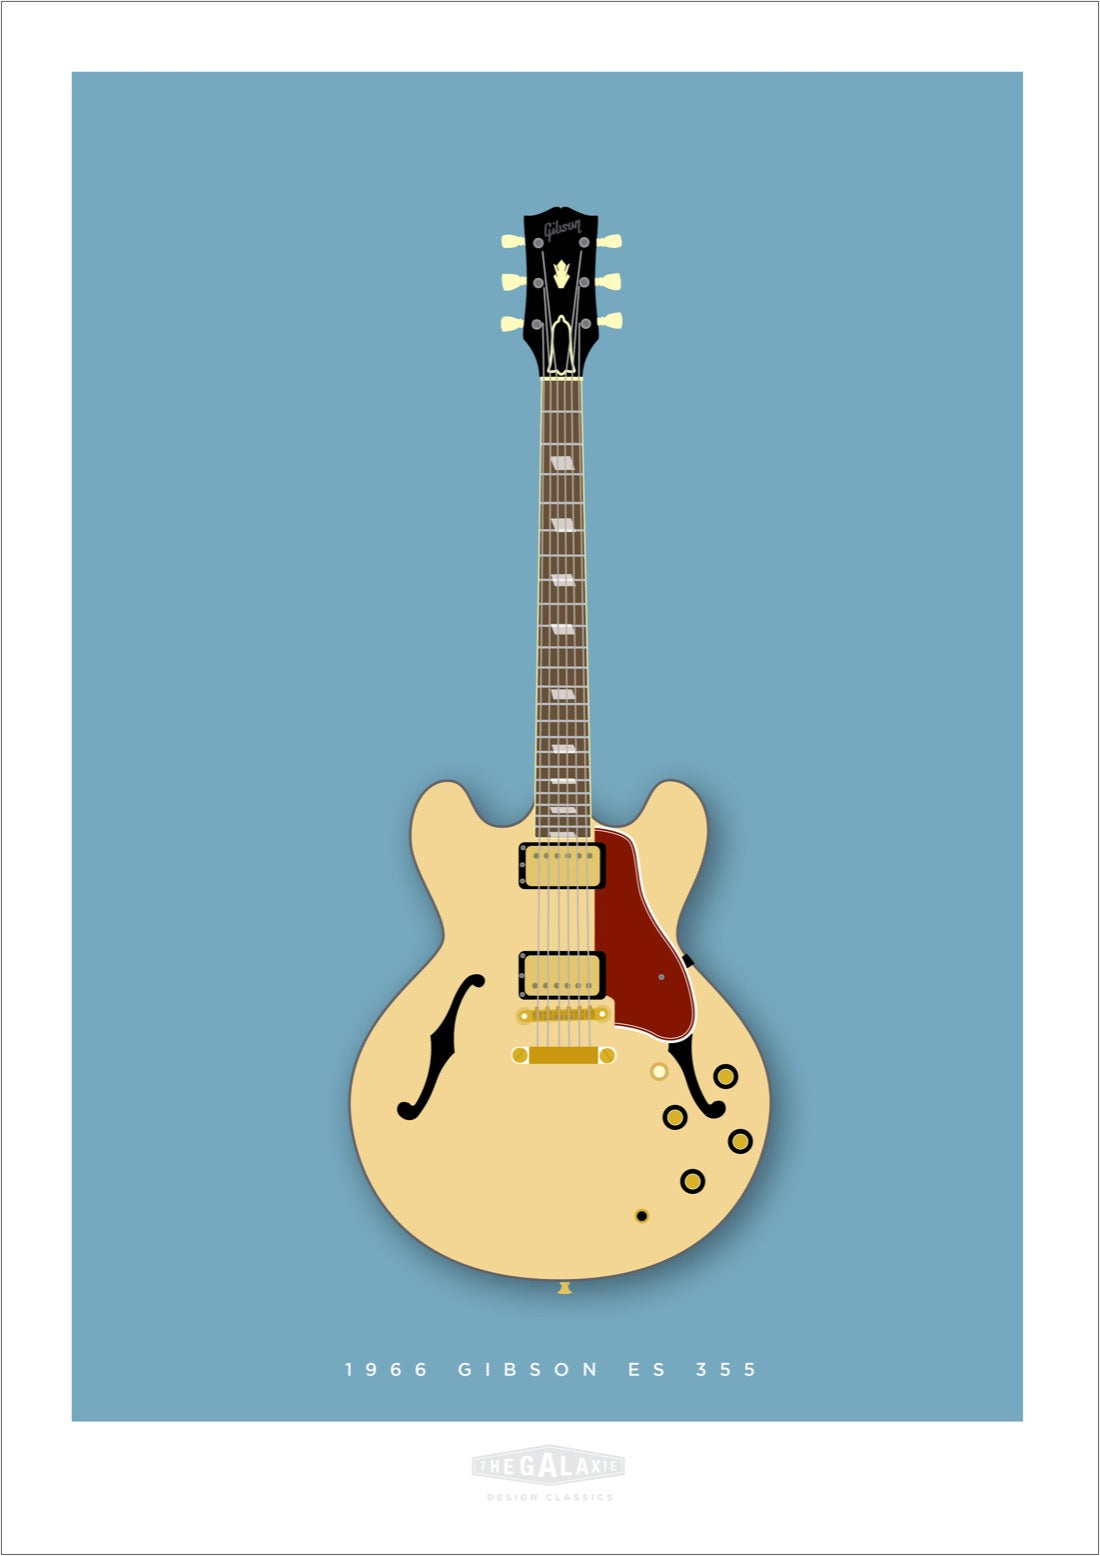 An original hand drawn poster of a natural 1966 Gibson ES 355 on a blue background.